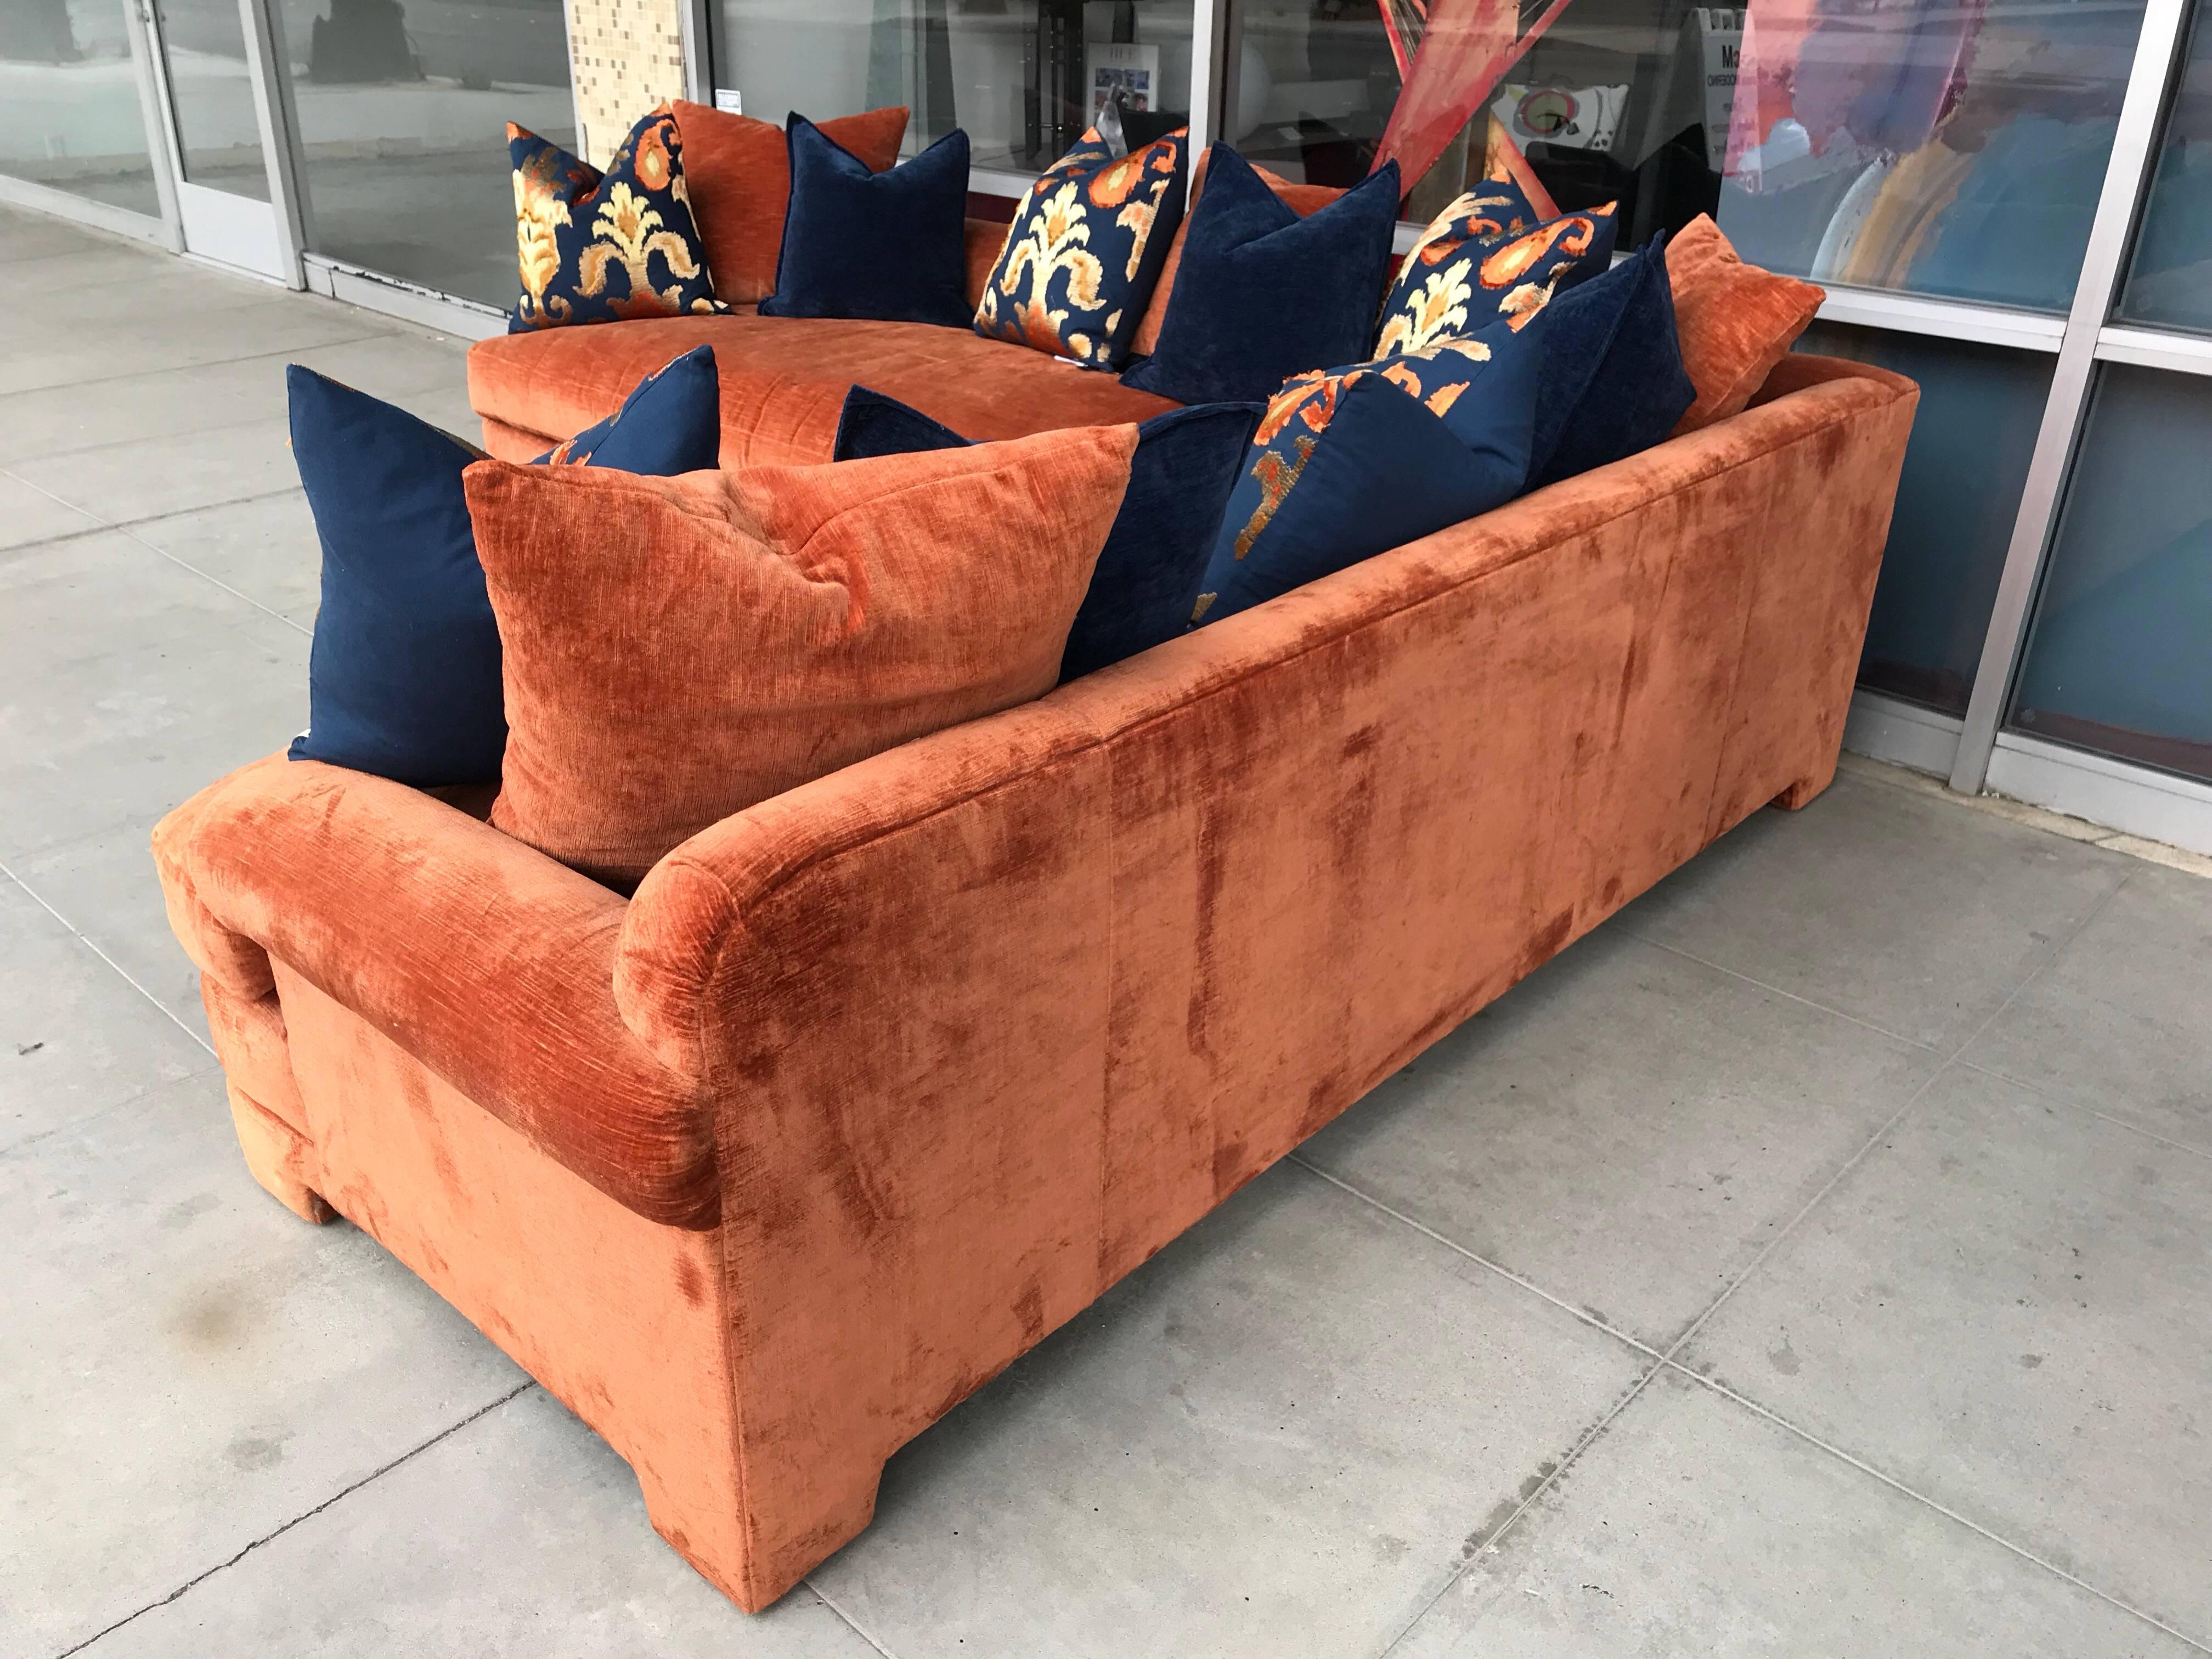 This very beautiful two-piece sectional was owned by a prominent gallery owner in Palm Springs. The entire residence had custom furniture, including this Marge Carson Sectional in antique burnt velvet. The sofa includes 9 designer accent pillows and